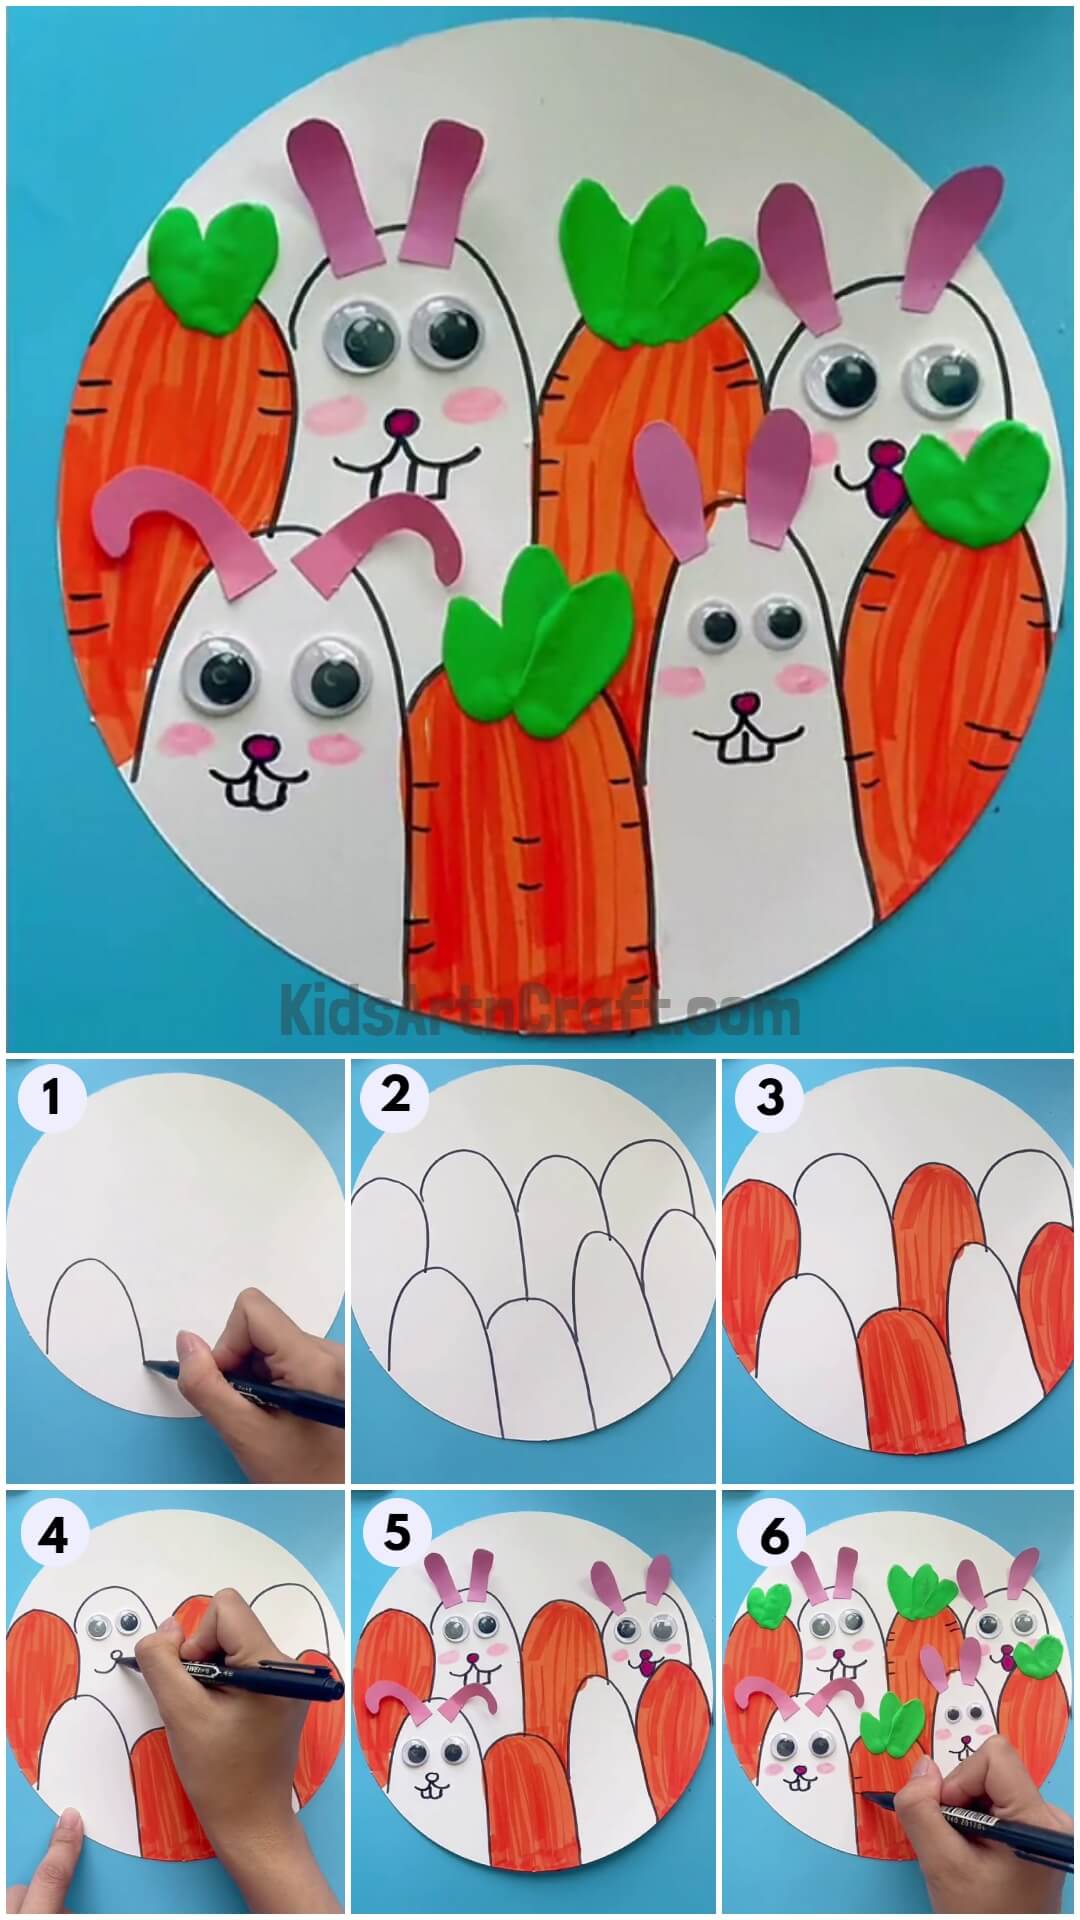 Easy Bunny & Carrot drawing Idea for kids - Kids Art & Craft